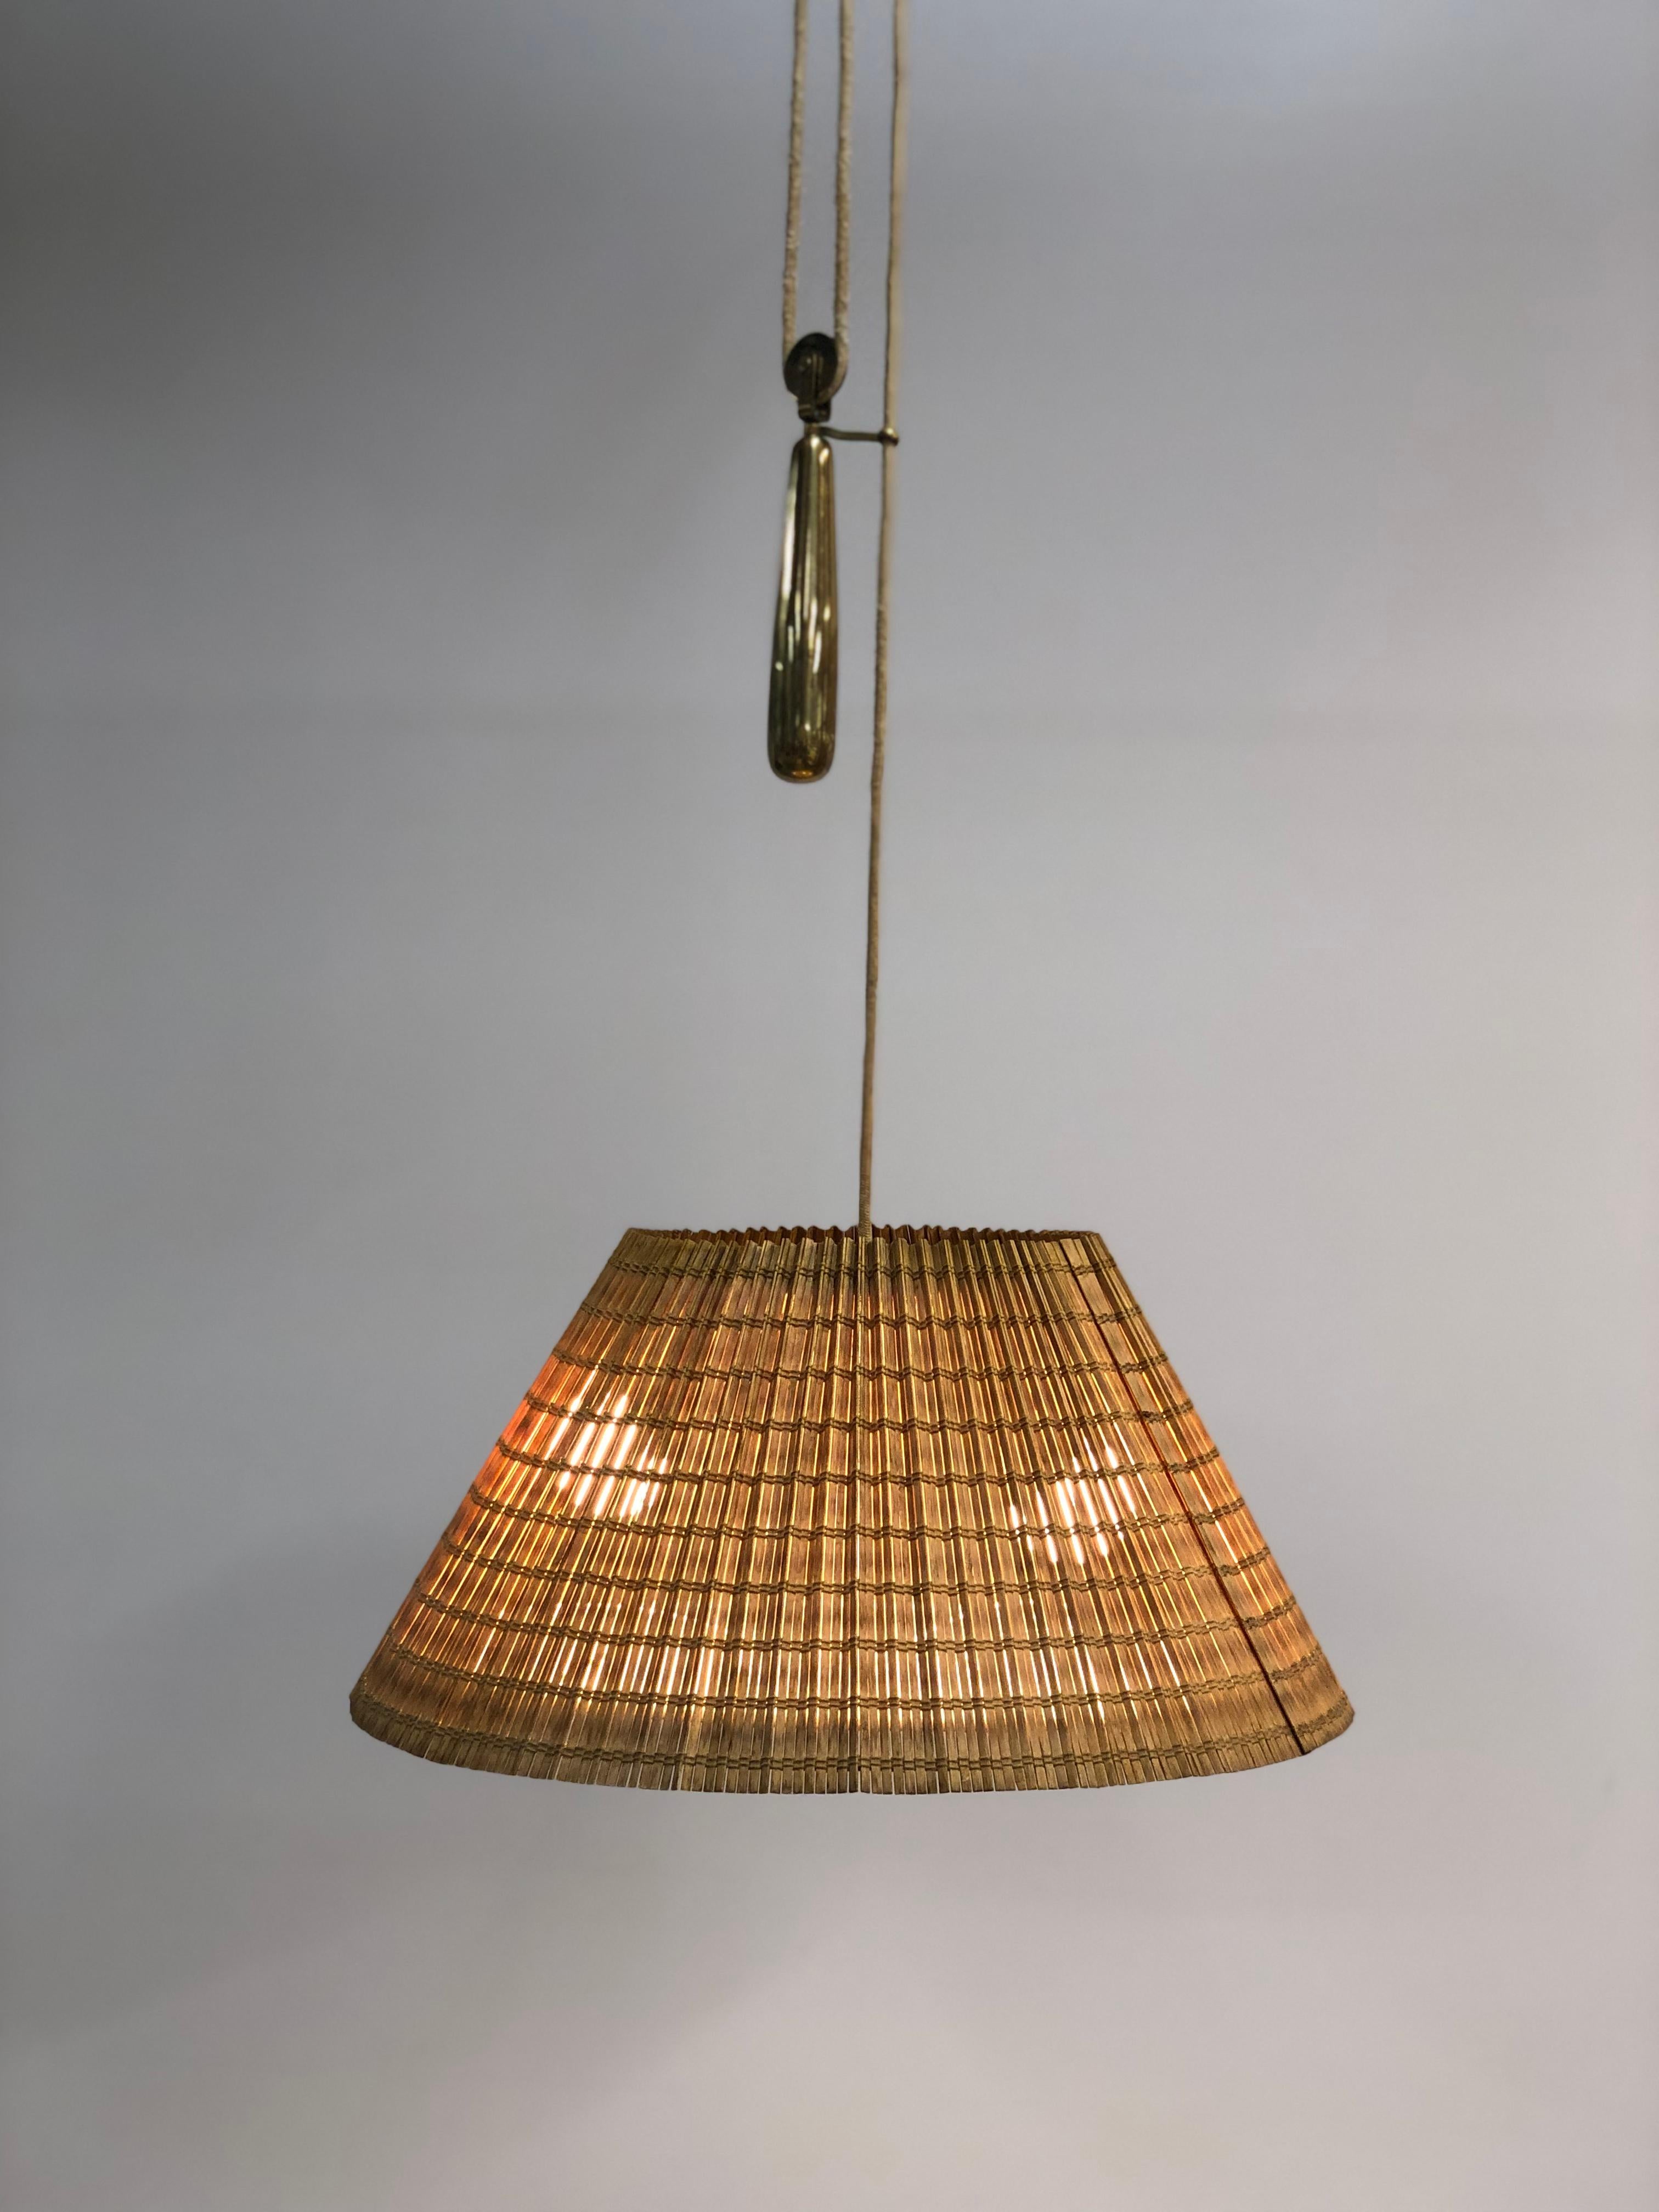 A beautiful adjustable lamp by Paavo Tynell that harmoniously unites the patinated brass with the rattan and fabric shade. The counterweight showcases Tynells genius by making the lamp suitable for different ceiling heights. The lamp still holds all